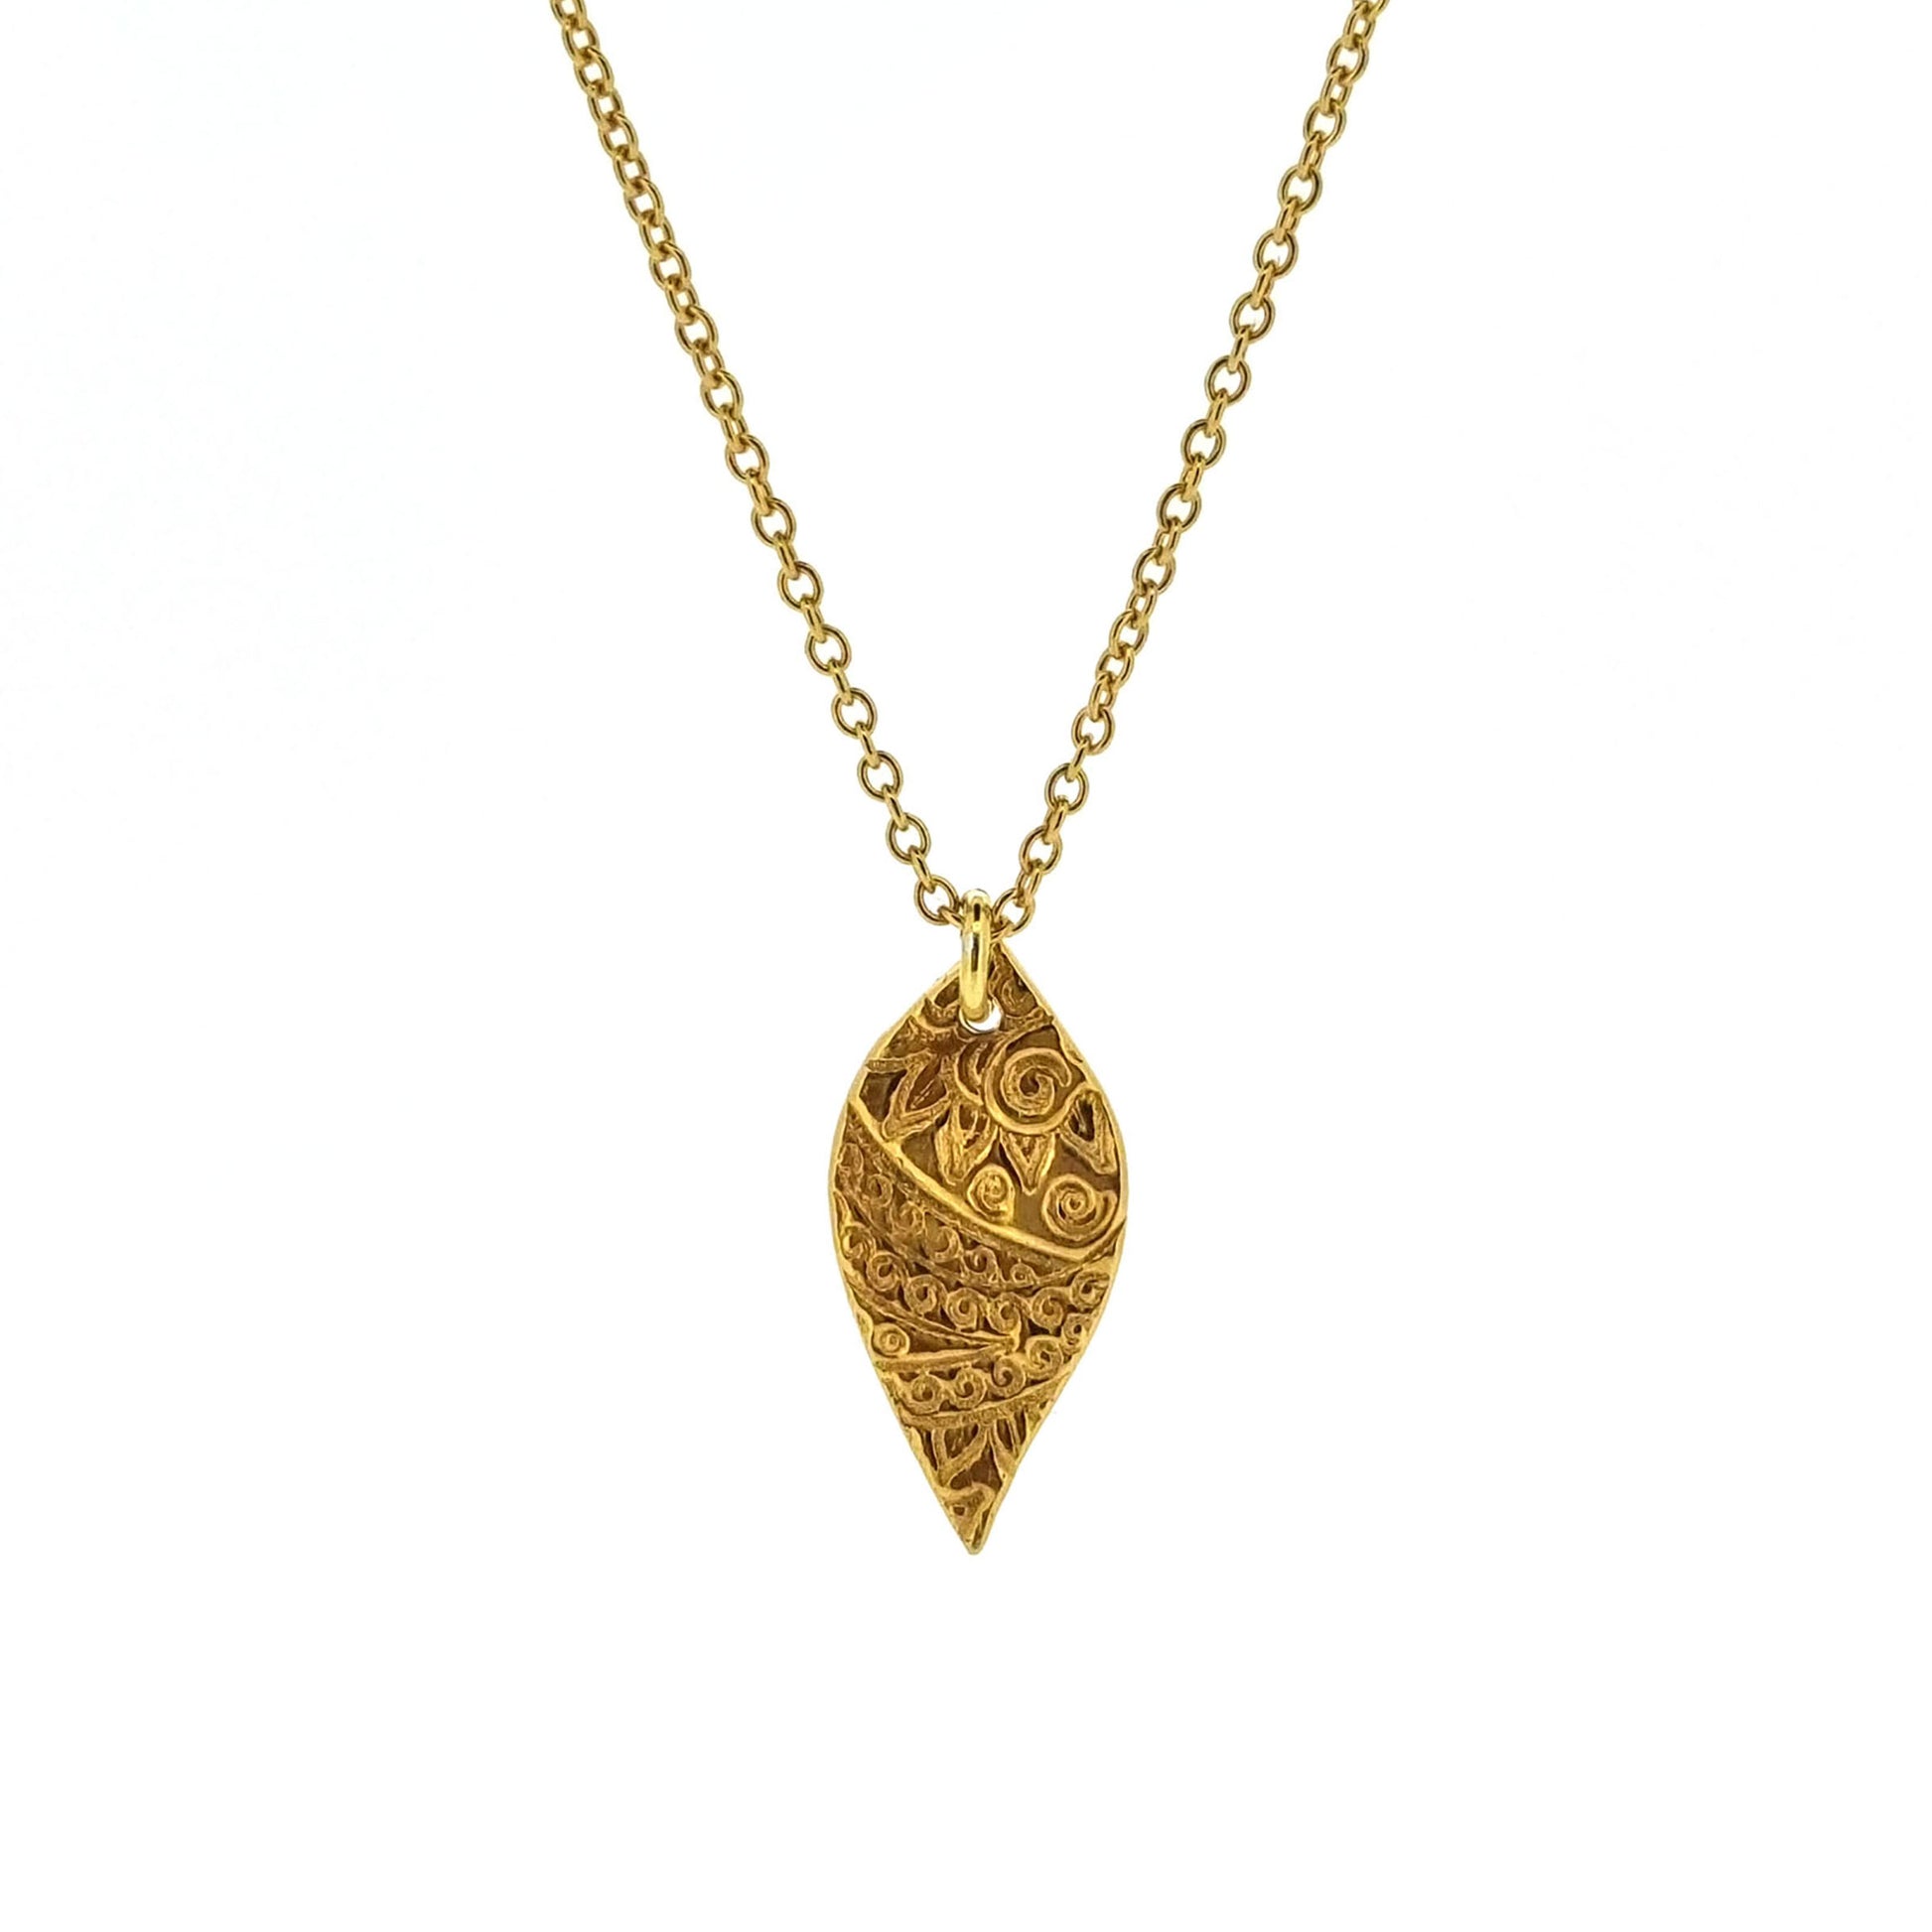 Yellow gold vermeil leaf-shaped patterned pendant on a yellow gold vermeil chain. Small.